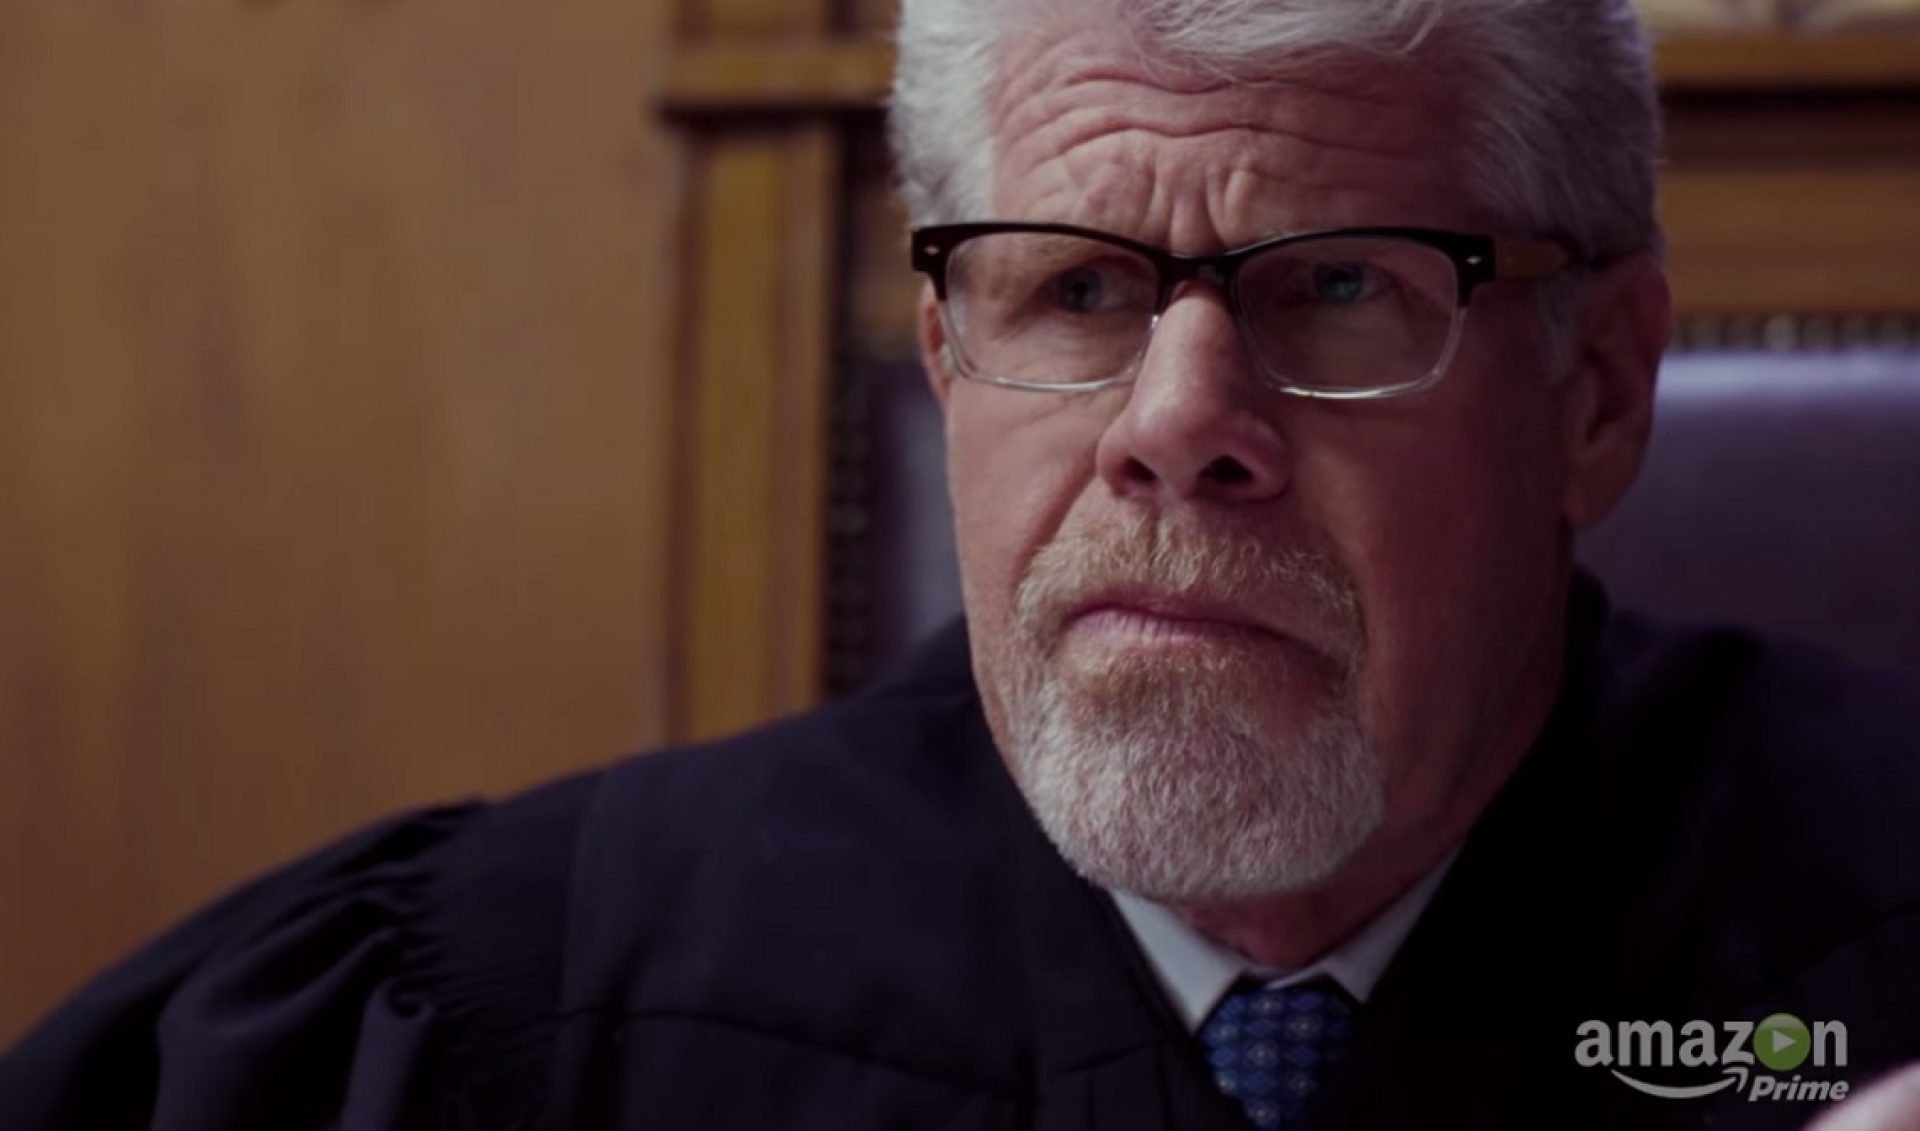 Amazon Drops Official Trailer For ‘Hand Of God’ Series Starring Ron Perlman